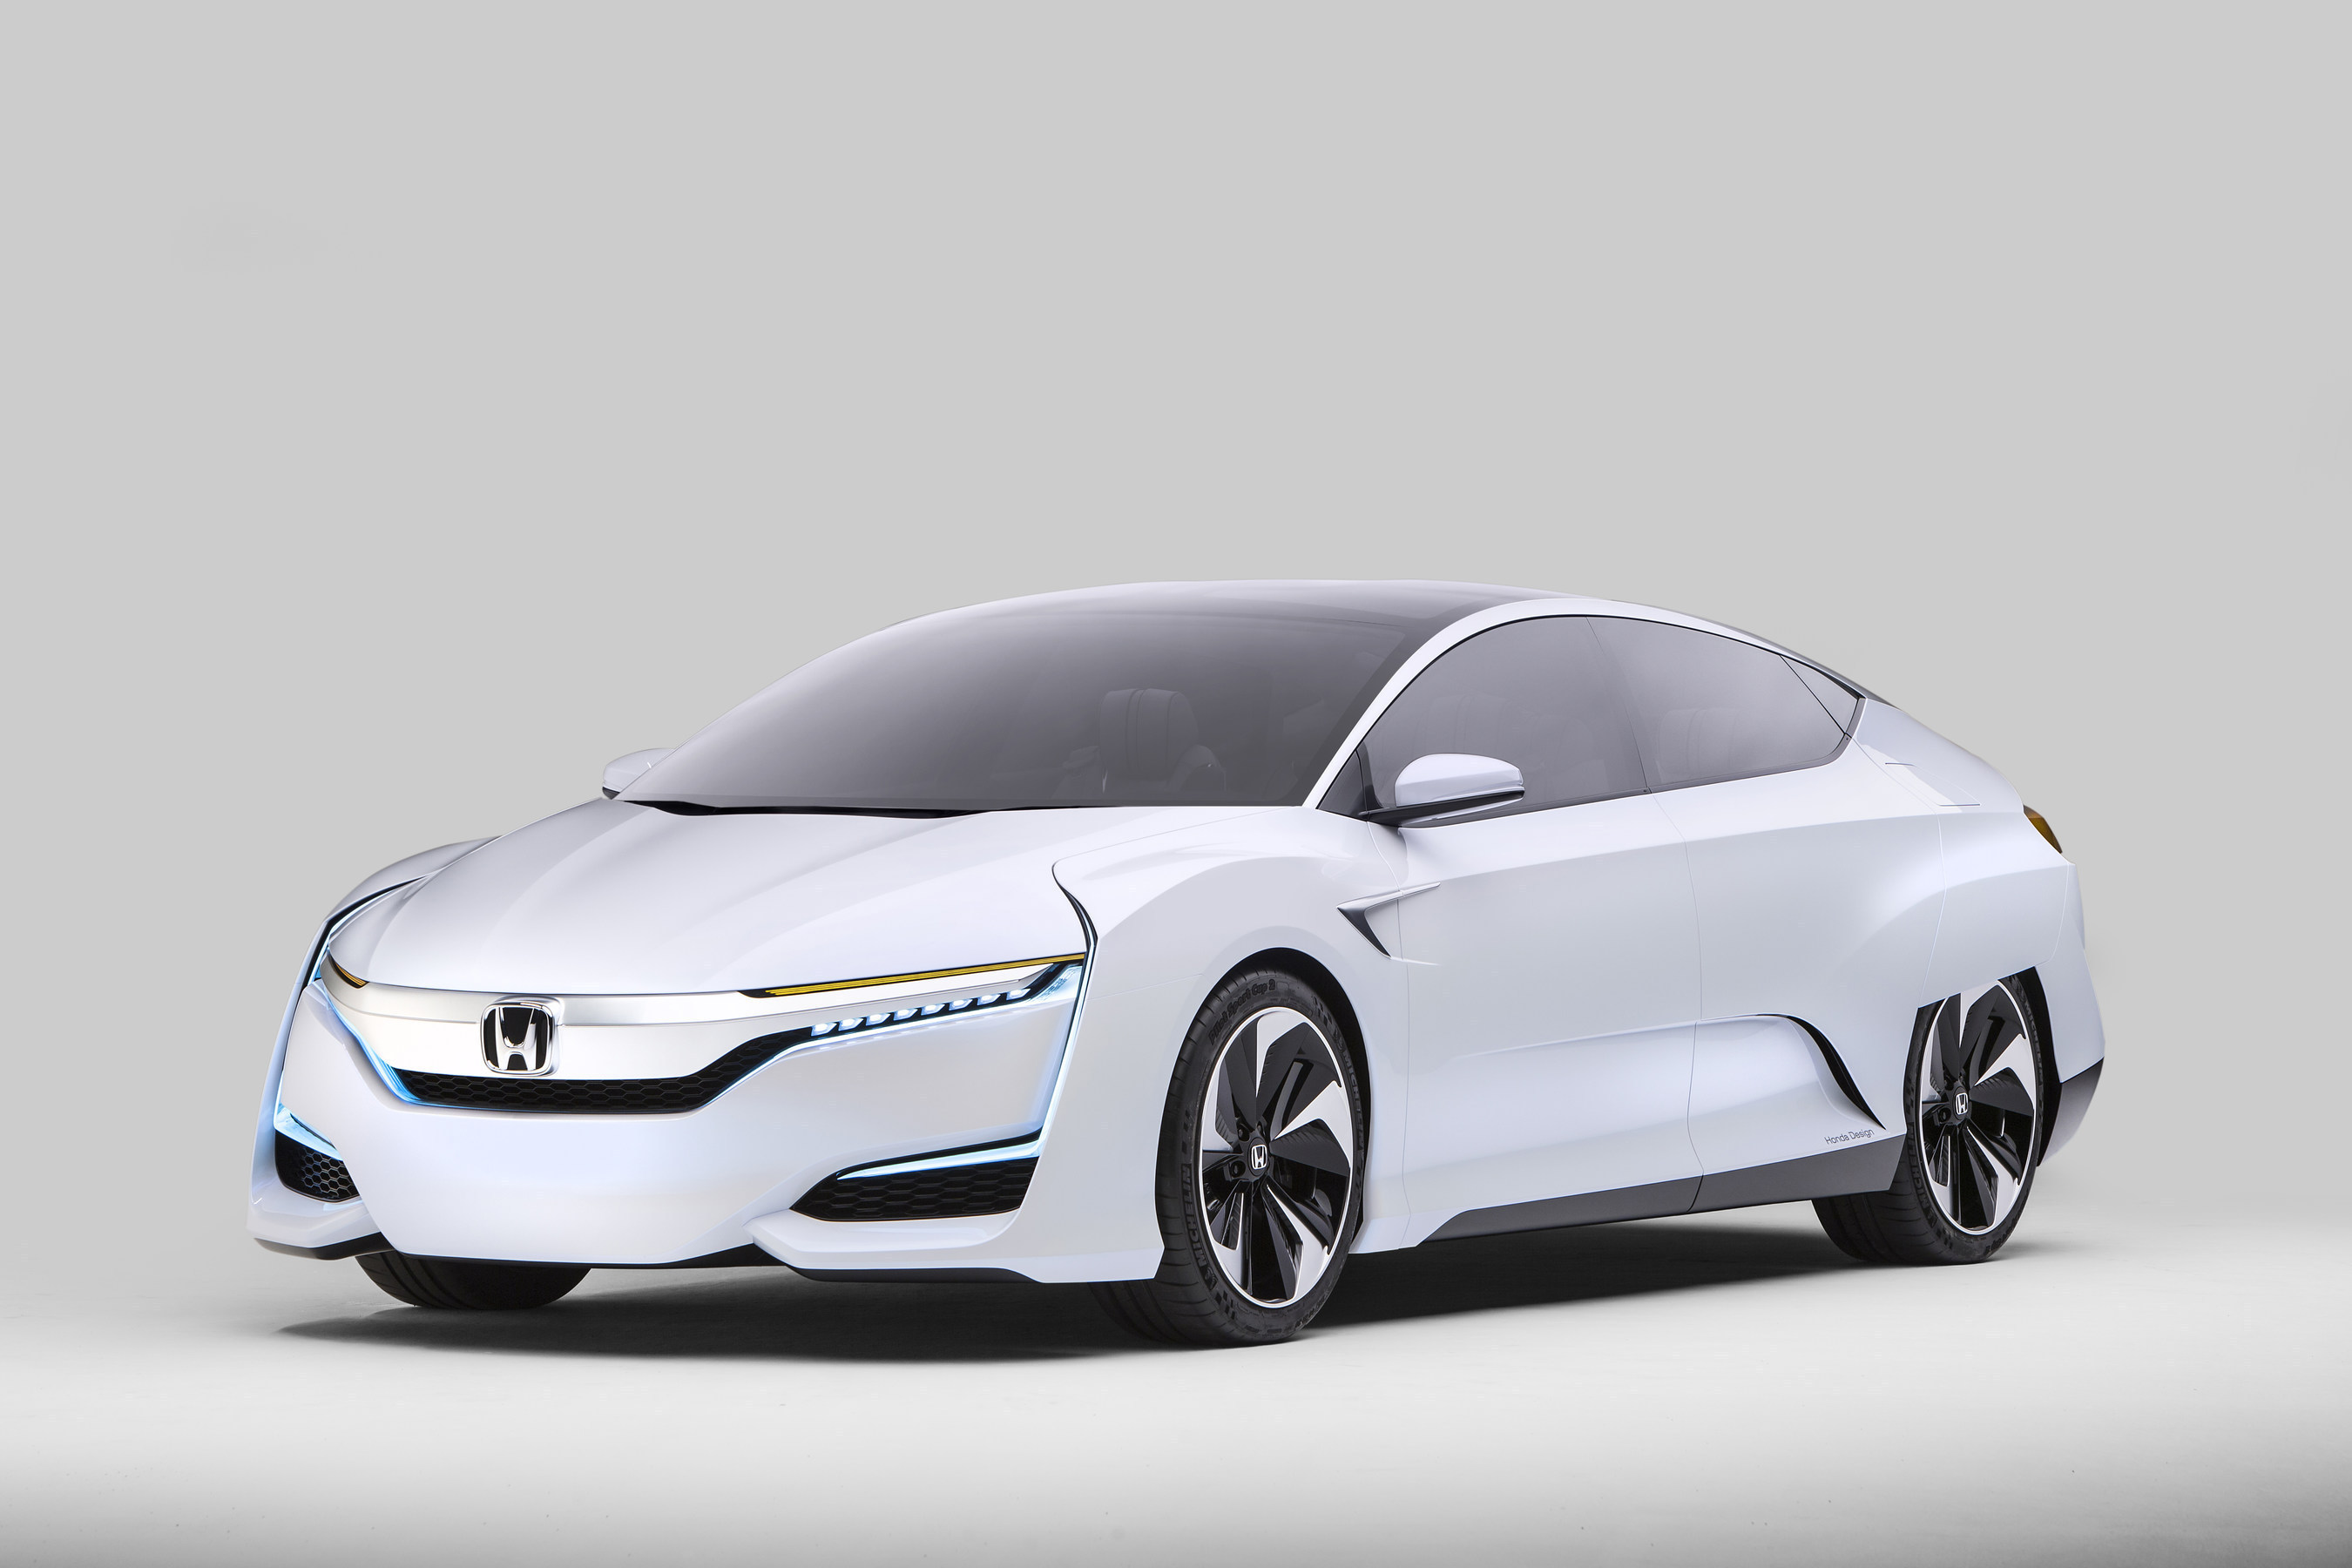 Honda to Highlight Zero-Emissions FCV Concept in the Nation's Capital